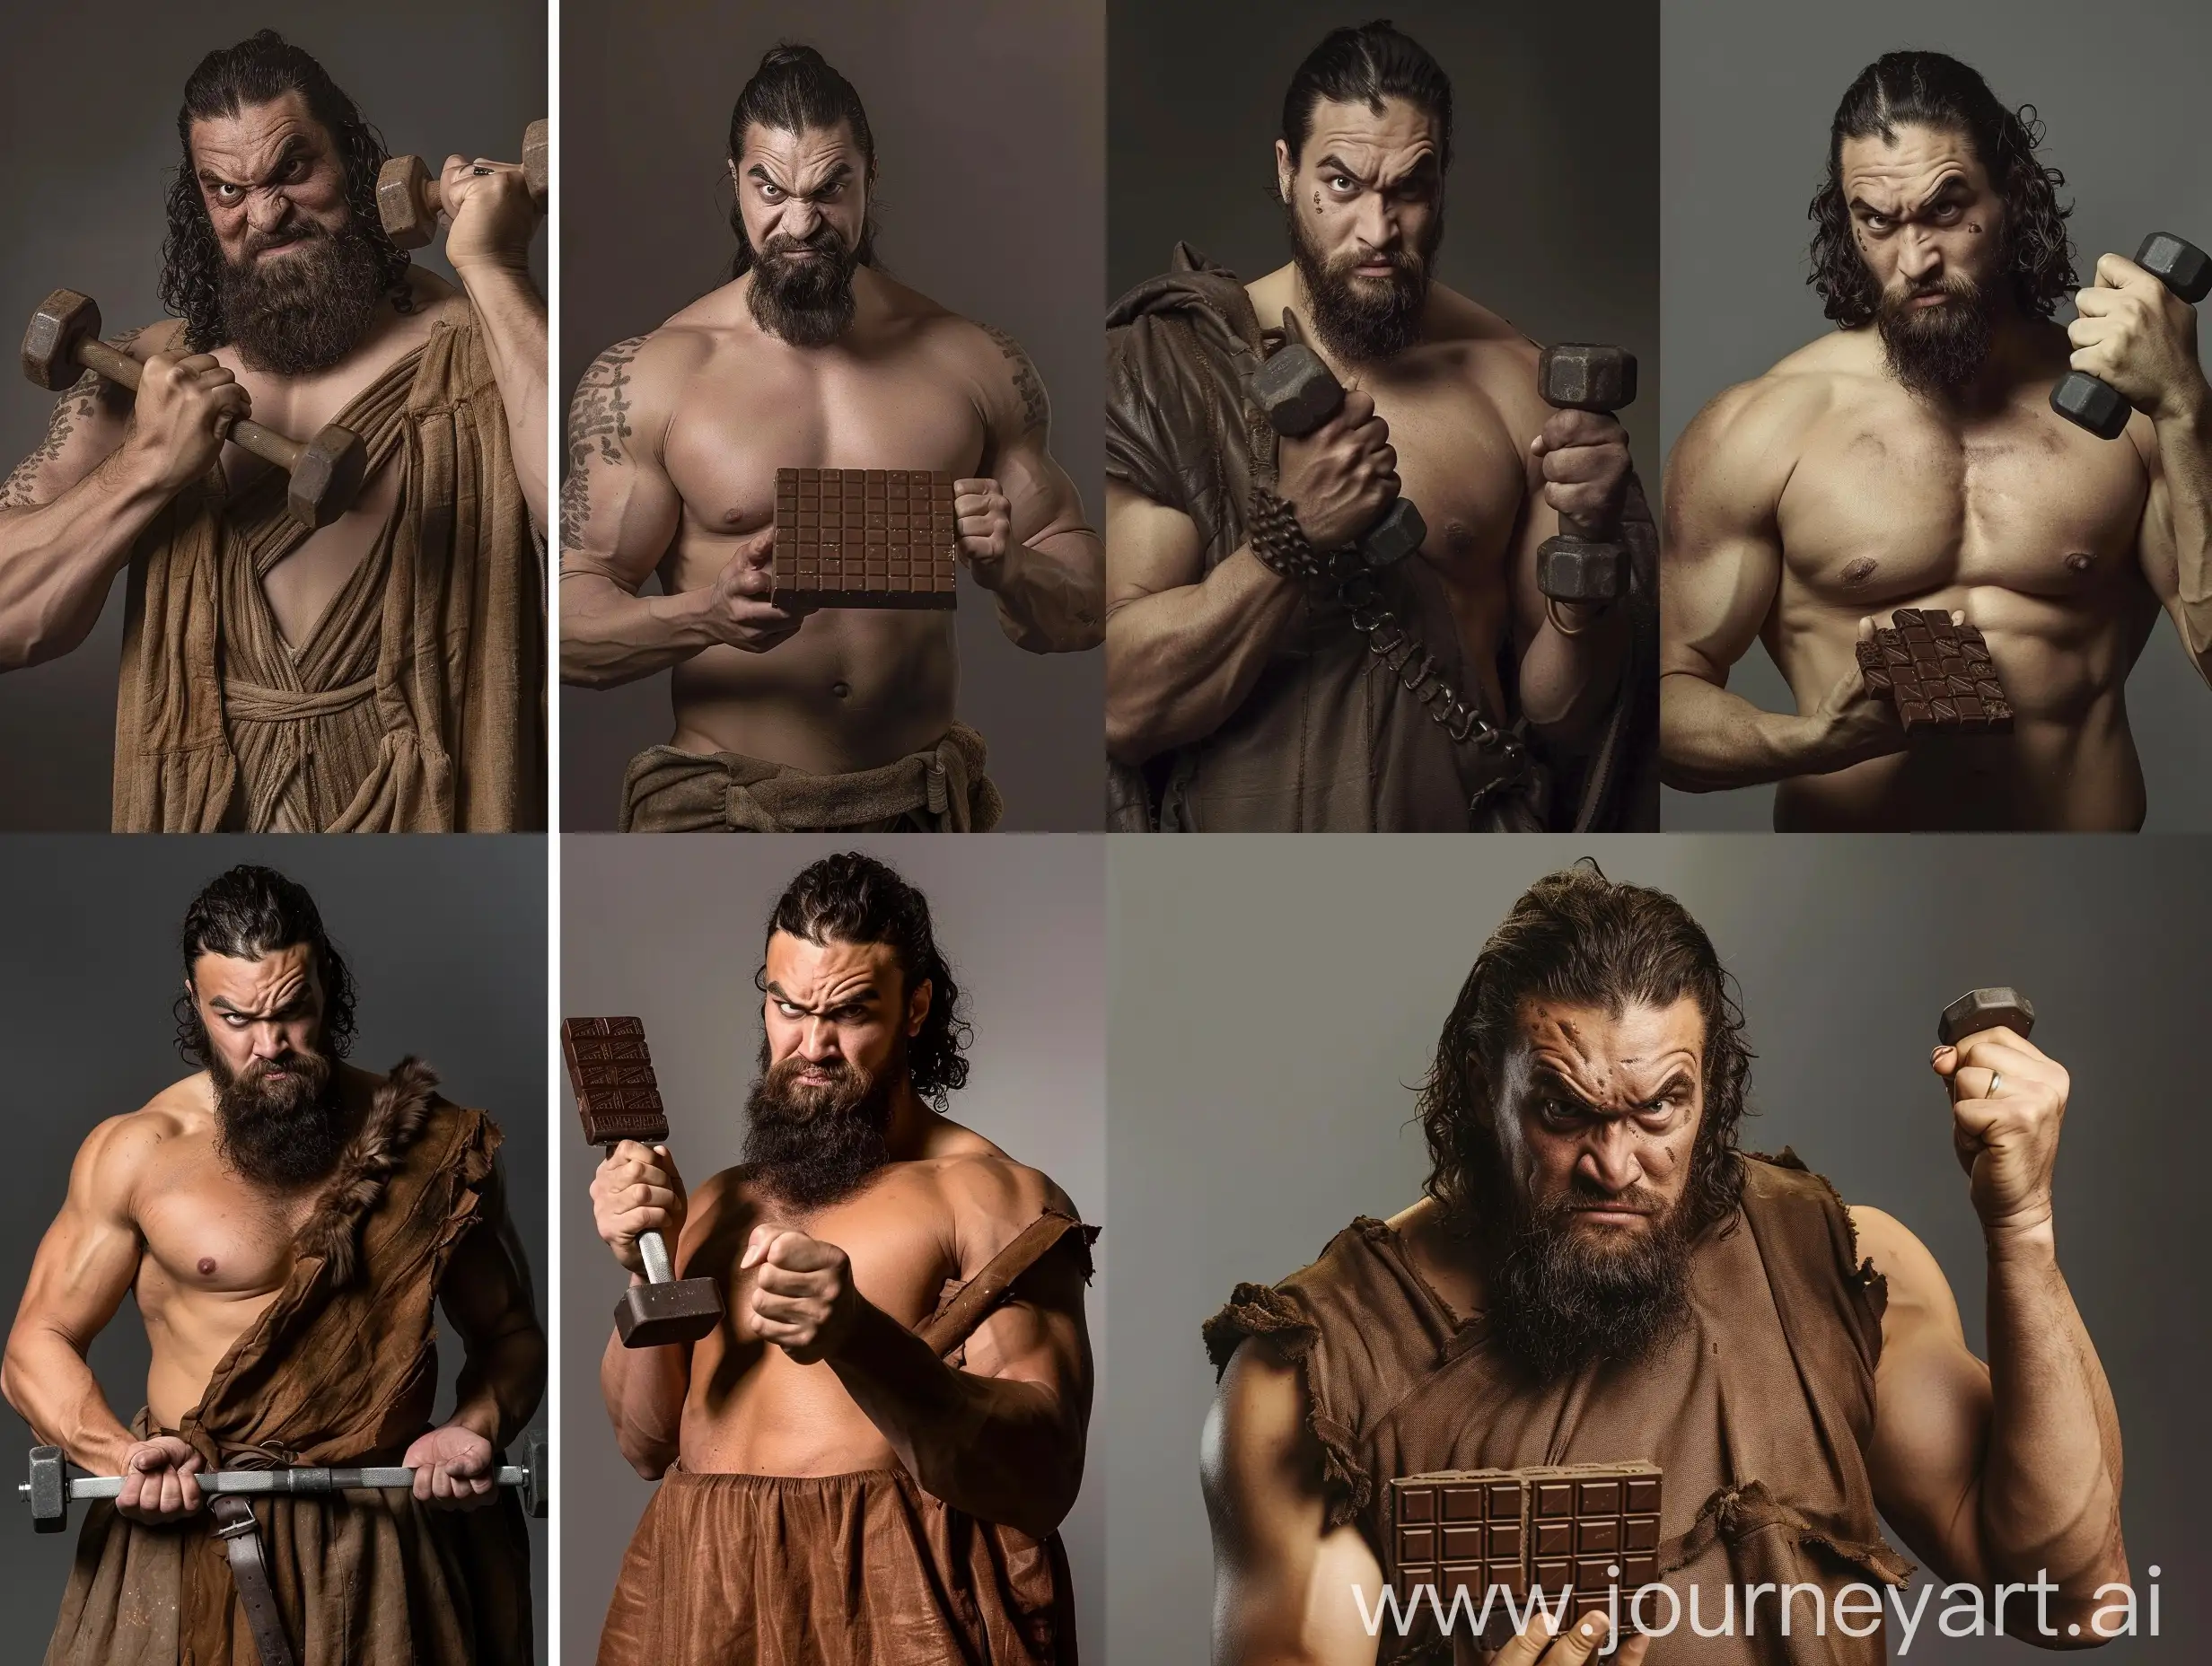 Khal Drogo (played by Jason Momoa) in the Game of Thrones series, Khal Drogo is fat and has a very fat face and body, Khal Drogo with the same face and fat body wears an old brown tunic, Khal Drogo with the same face and fat body in The club is Winterfell. Khal Drogo with the same face and very fat body holds a dumbbell in his right hand, Khal Drogo with the same face and fat body holds a chocolate bar in his left hand, Khal Drogo with the same face and very fat body looks at the camera with a mischievous smile , classic lighting, full body, q2